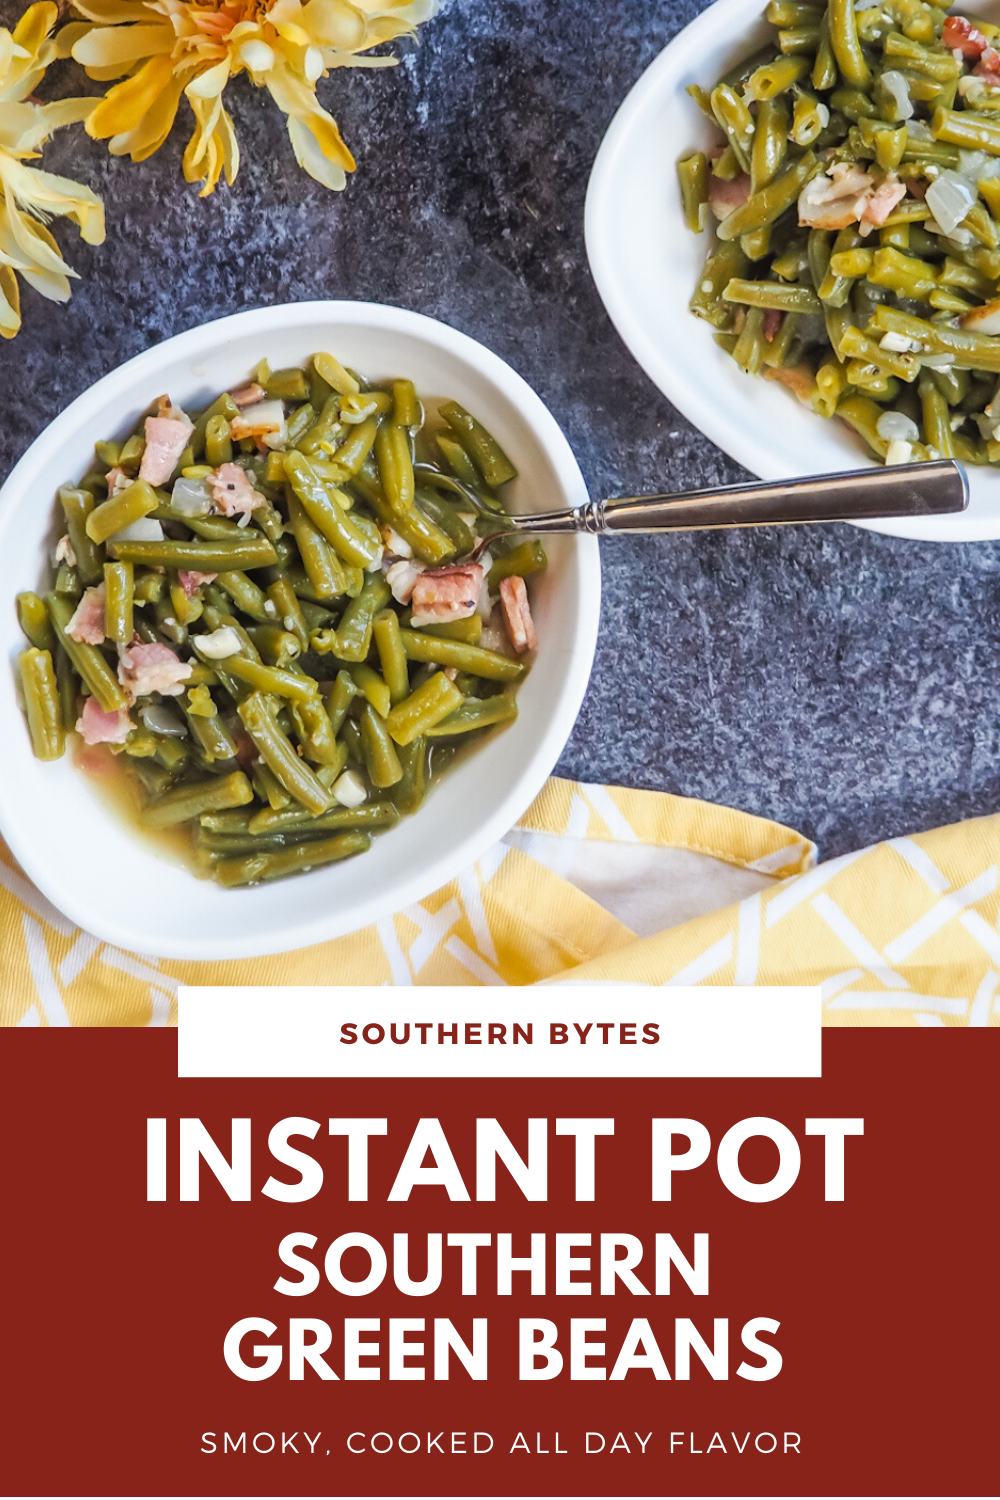 Southern Style Green Beans - Instant Pot - Southern Bytes